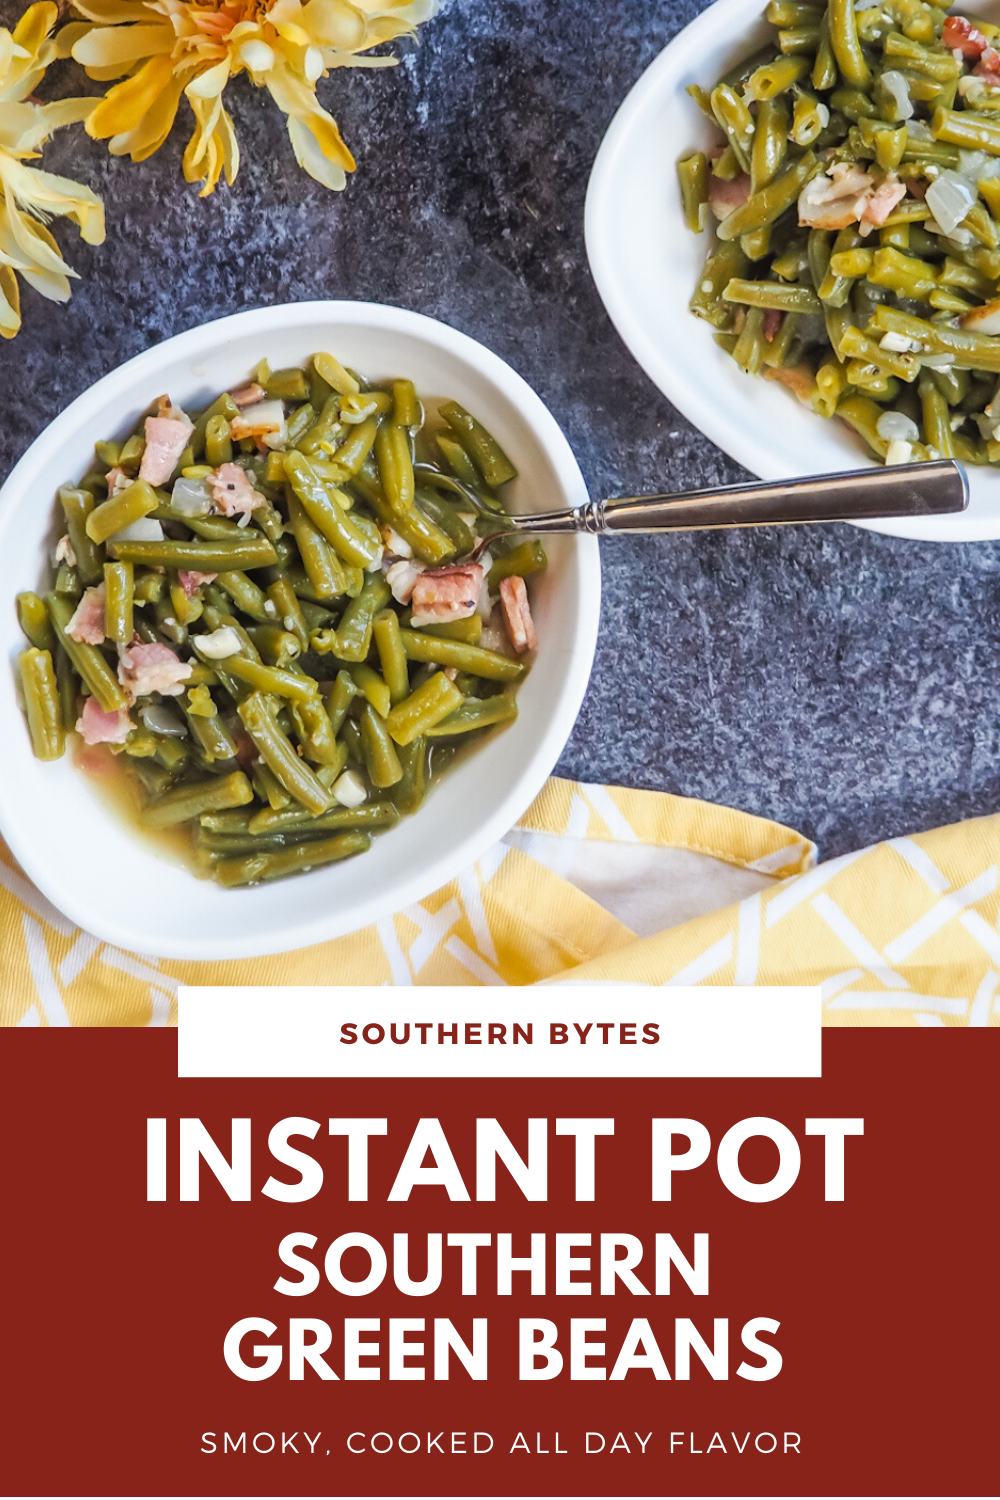 Southern Style Green Beans - Instant Pot - Southern Bytes